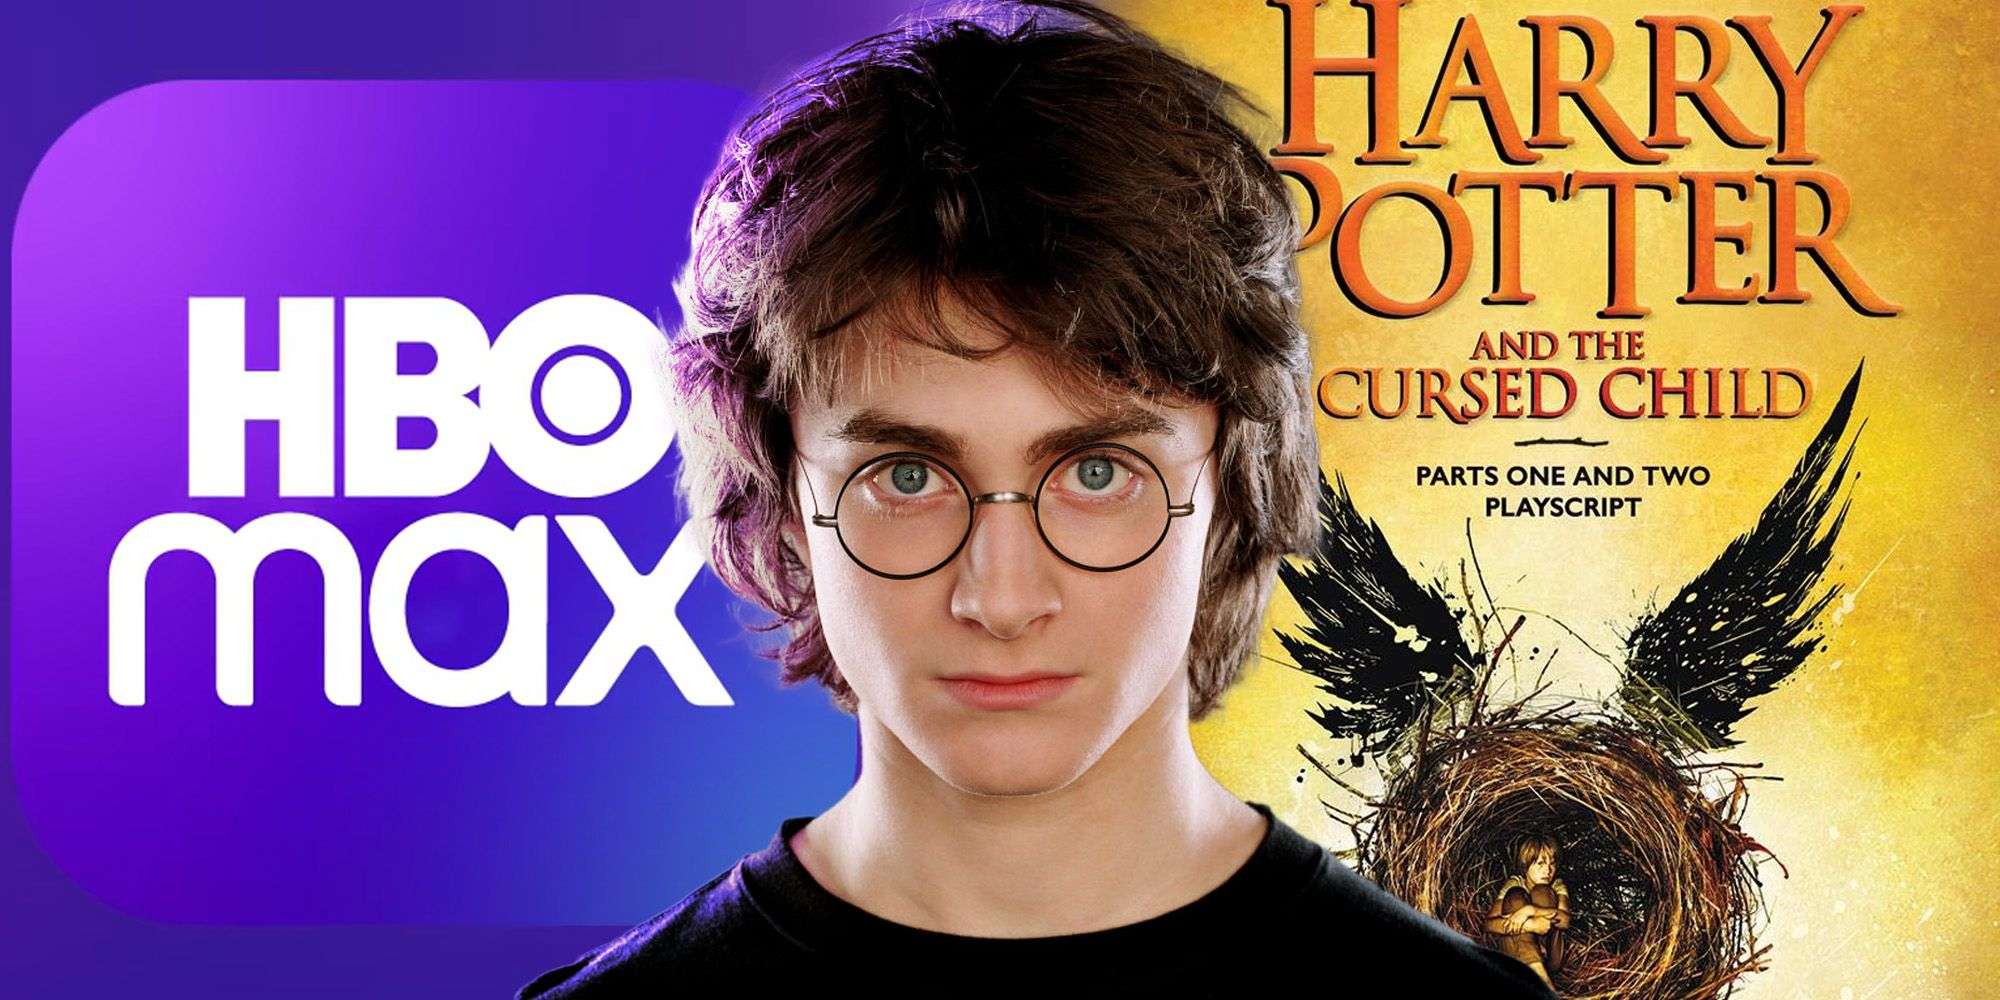 Harry Potter: Will HBO Max